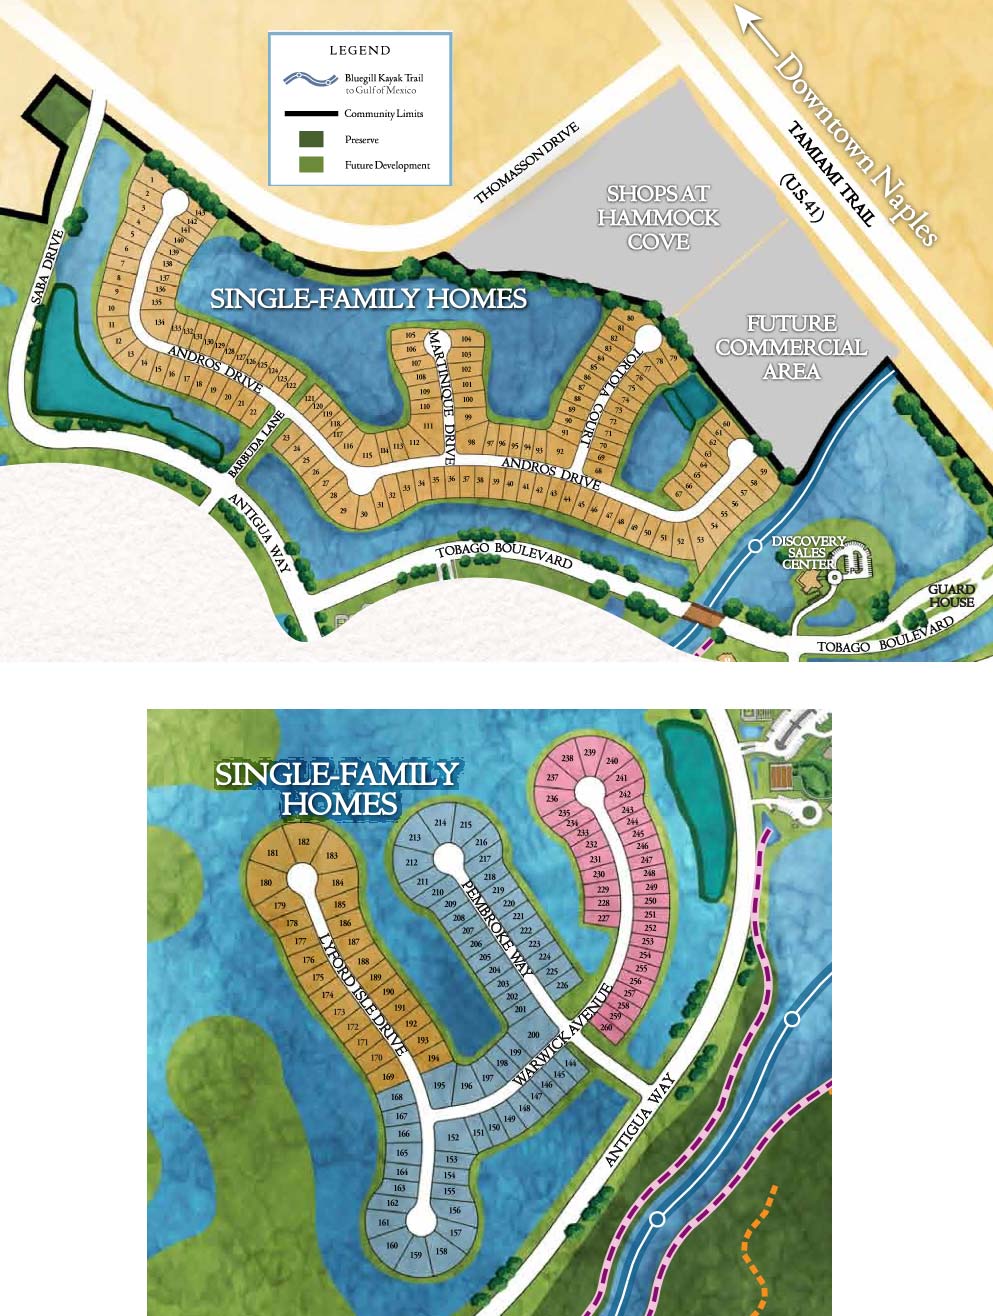 Single Family Homes Site Map